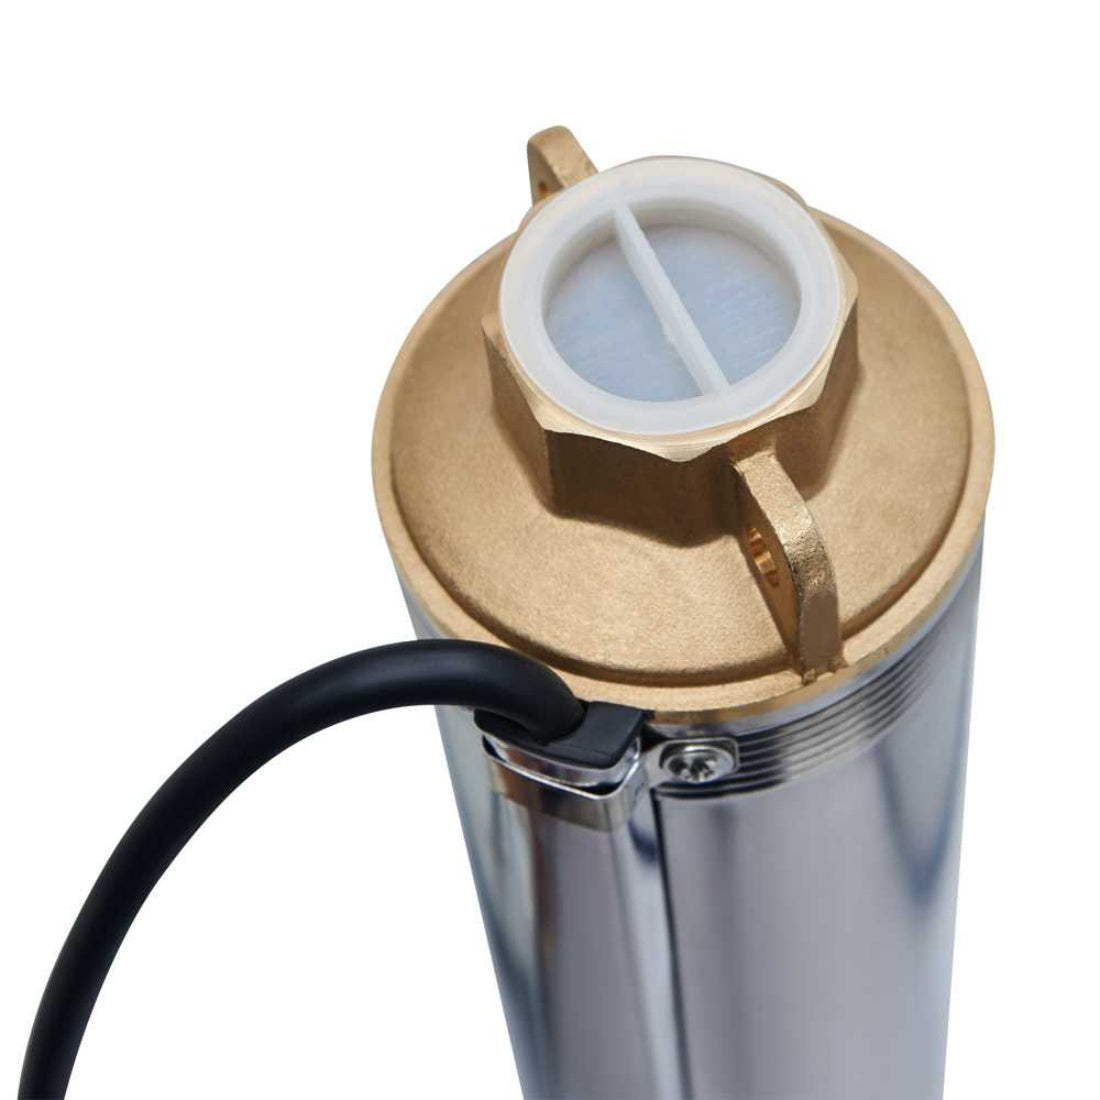 3.0 HP SUBMERSIBLE BORE WATER PUMP Deep Well Irrigation Stainless Steel 240V